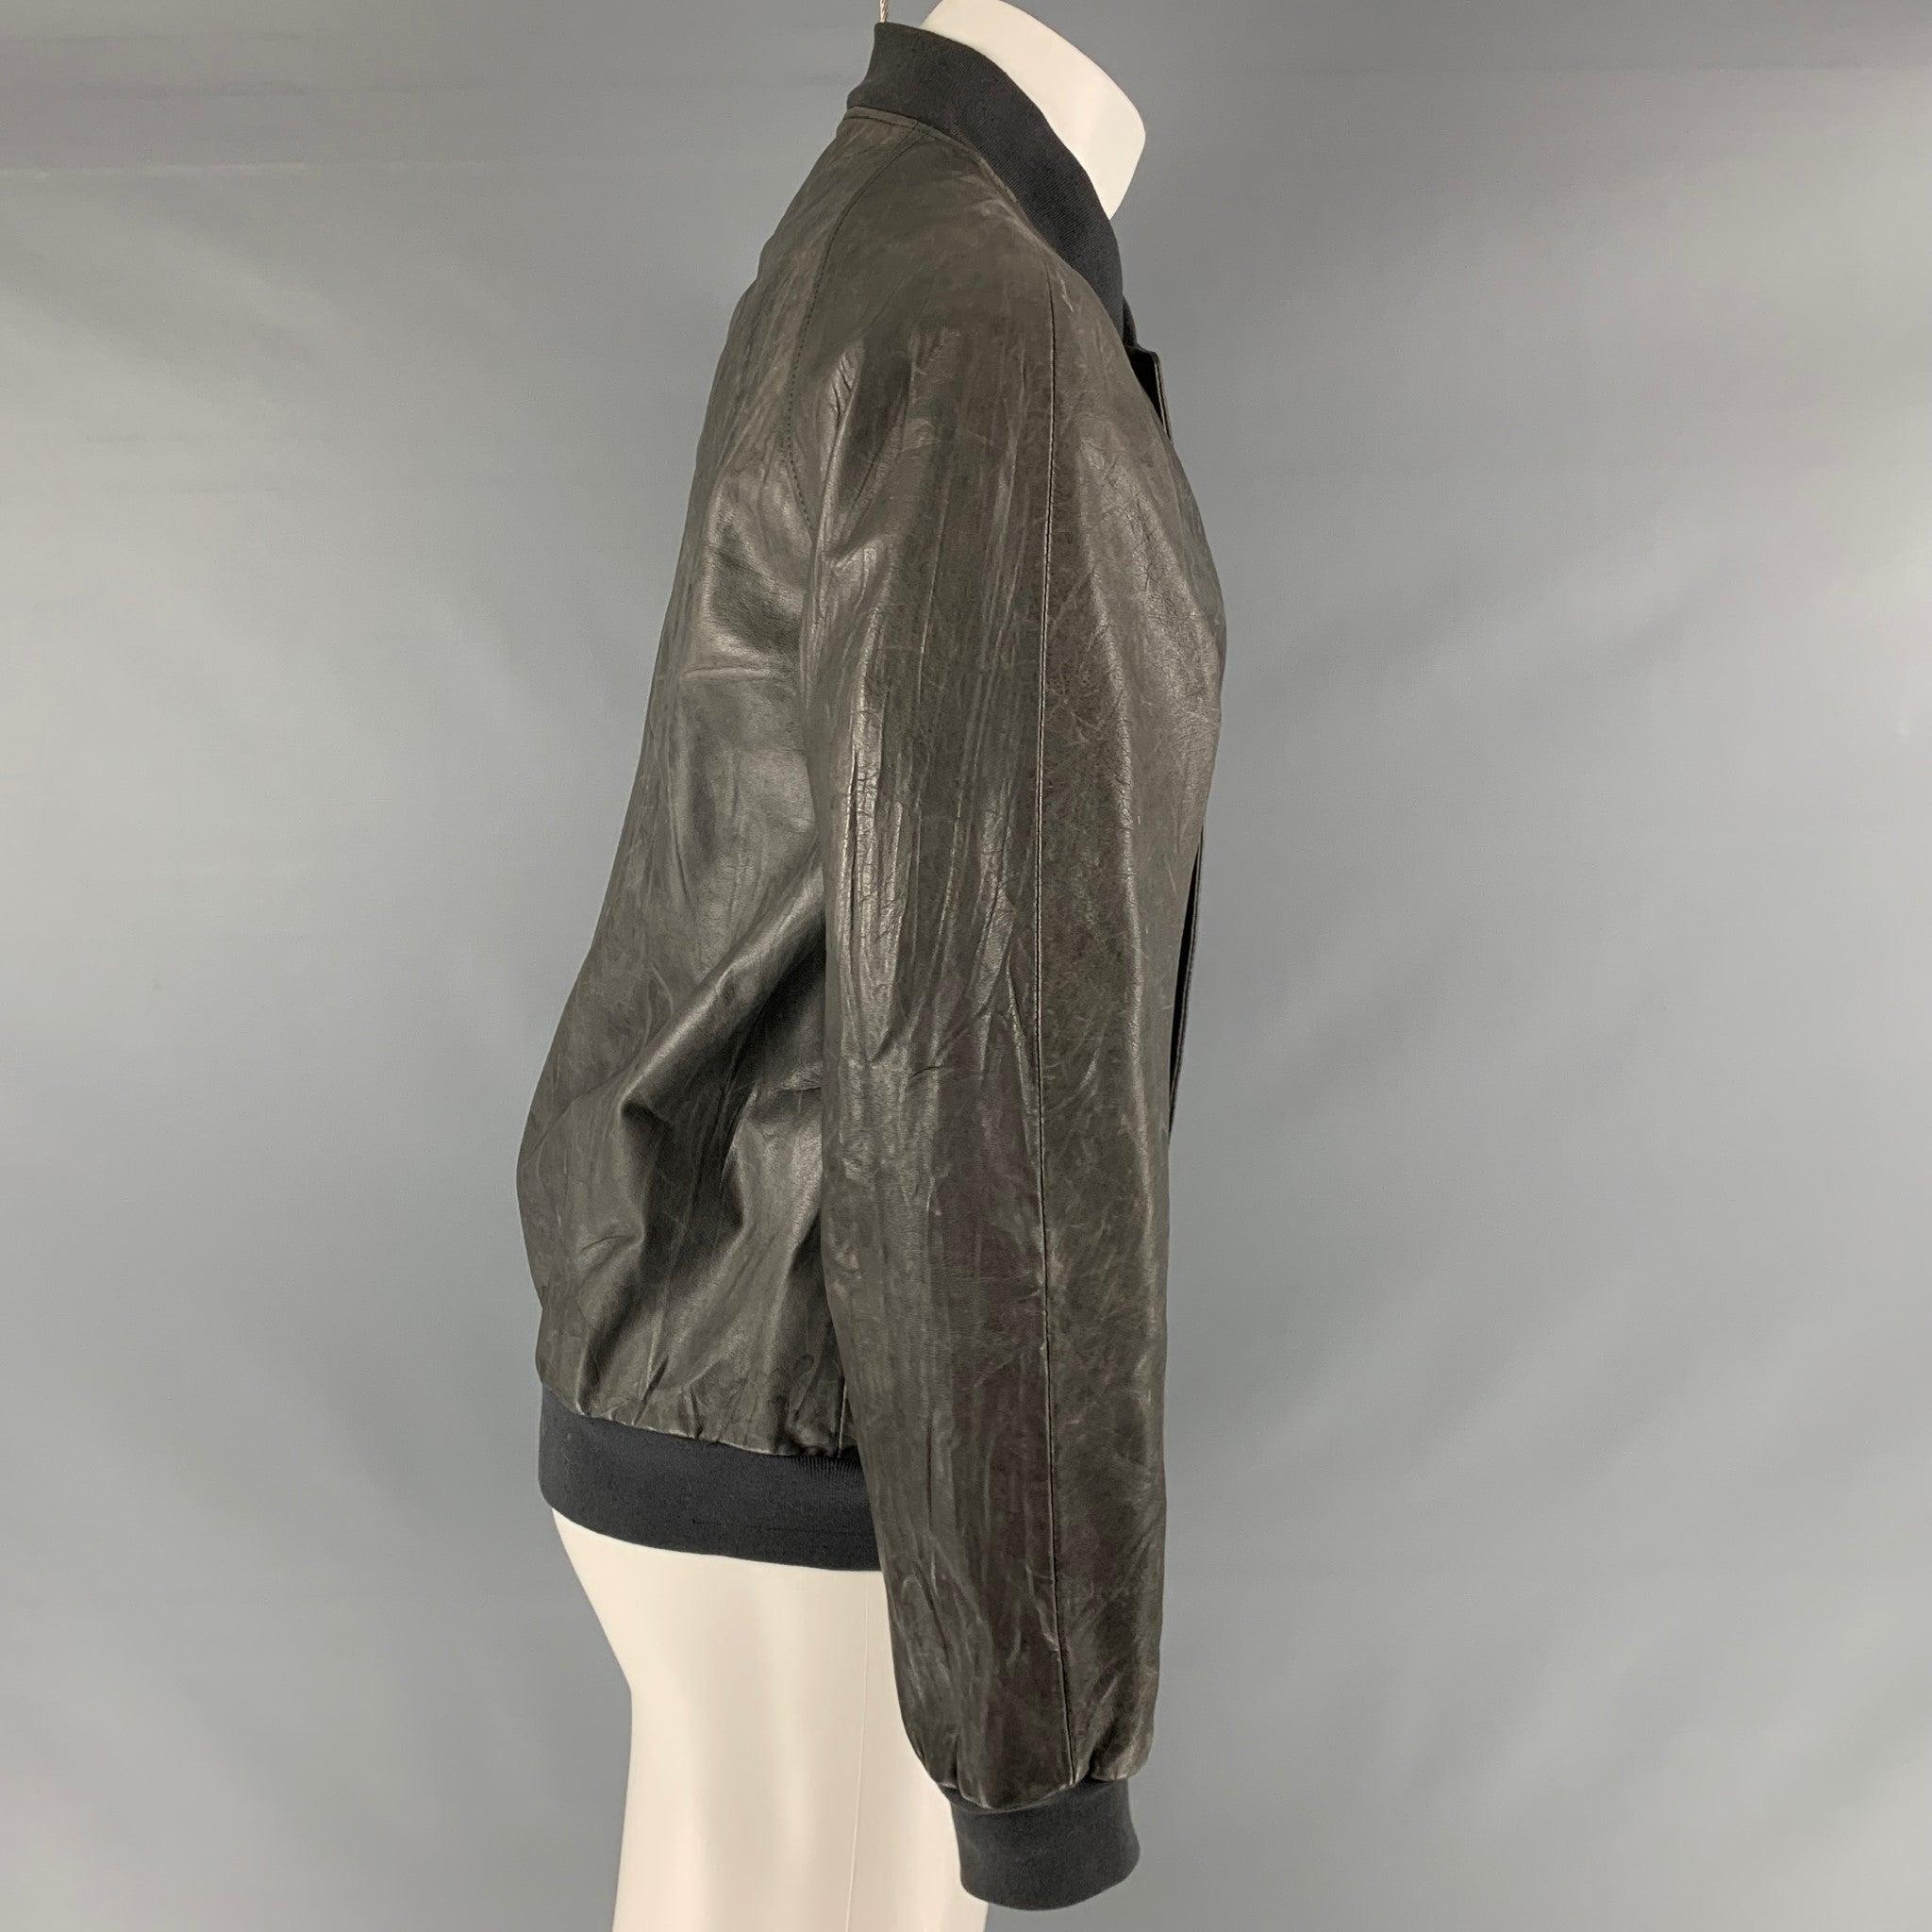 MARC JACOBS jacket comes in a grey leather material featuring a bomber style, skinny fit, ribbed hem, slit pockets, and a zip up closure. Made in Italy. Good Pre- Owned Conditions. Moderate signs of wear and marks. 

Marked:   50 

Measurements: 
